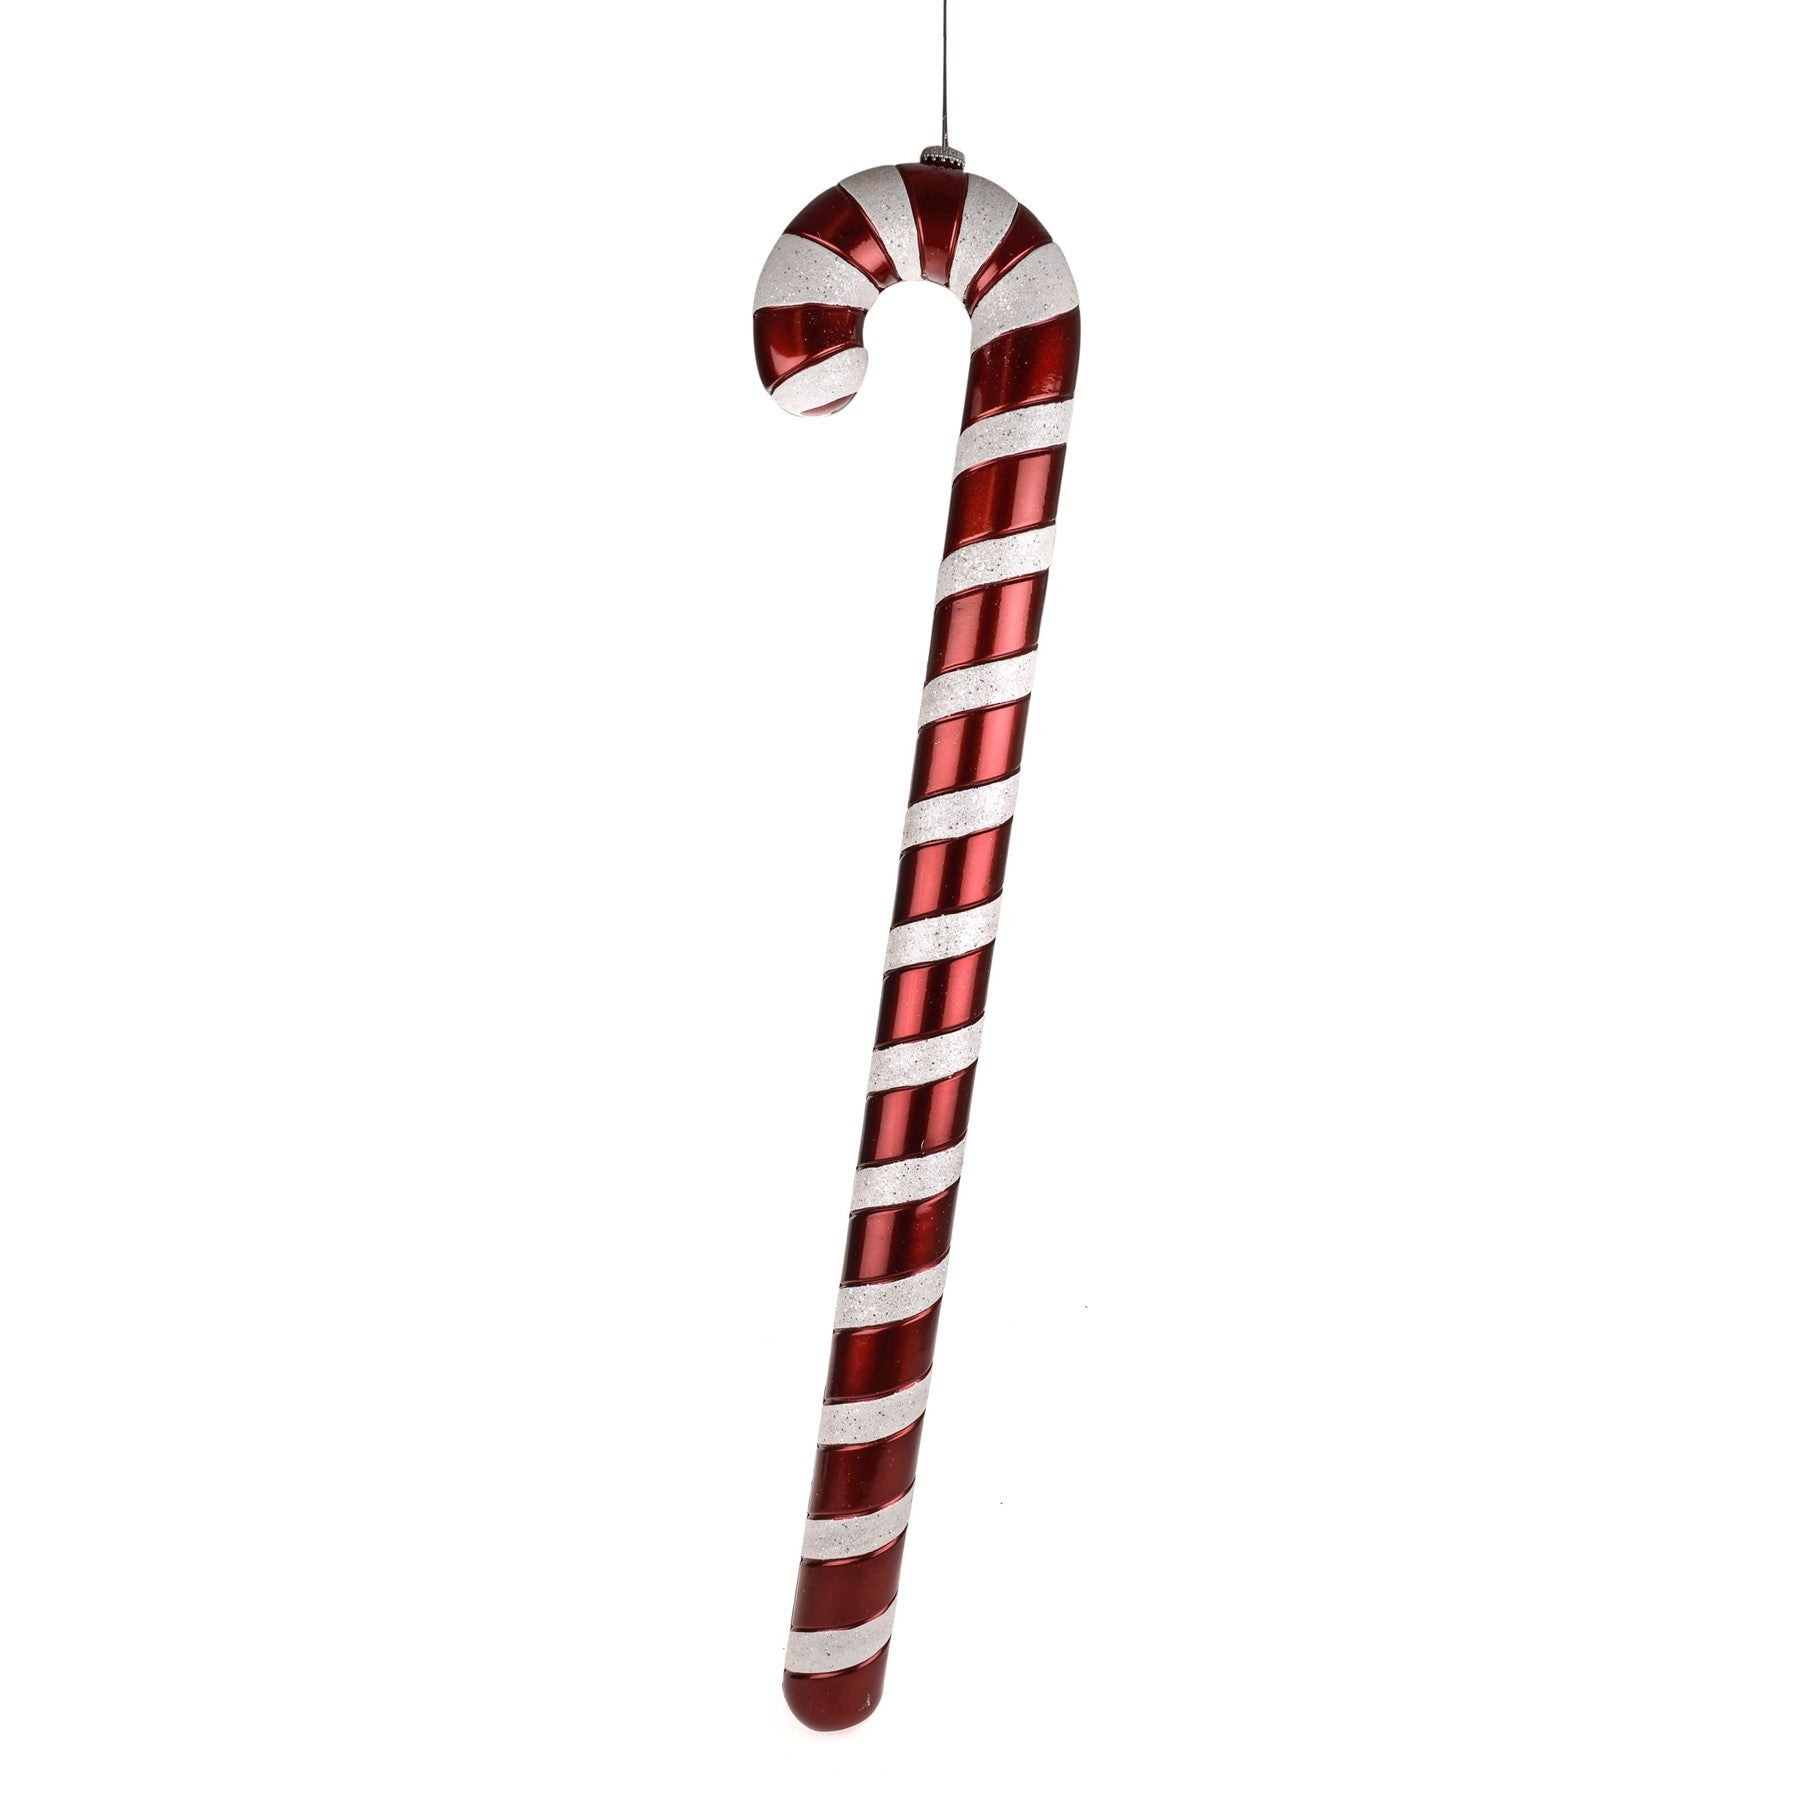 View Candy Cane Decoration 90cm information